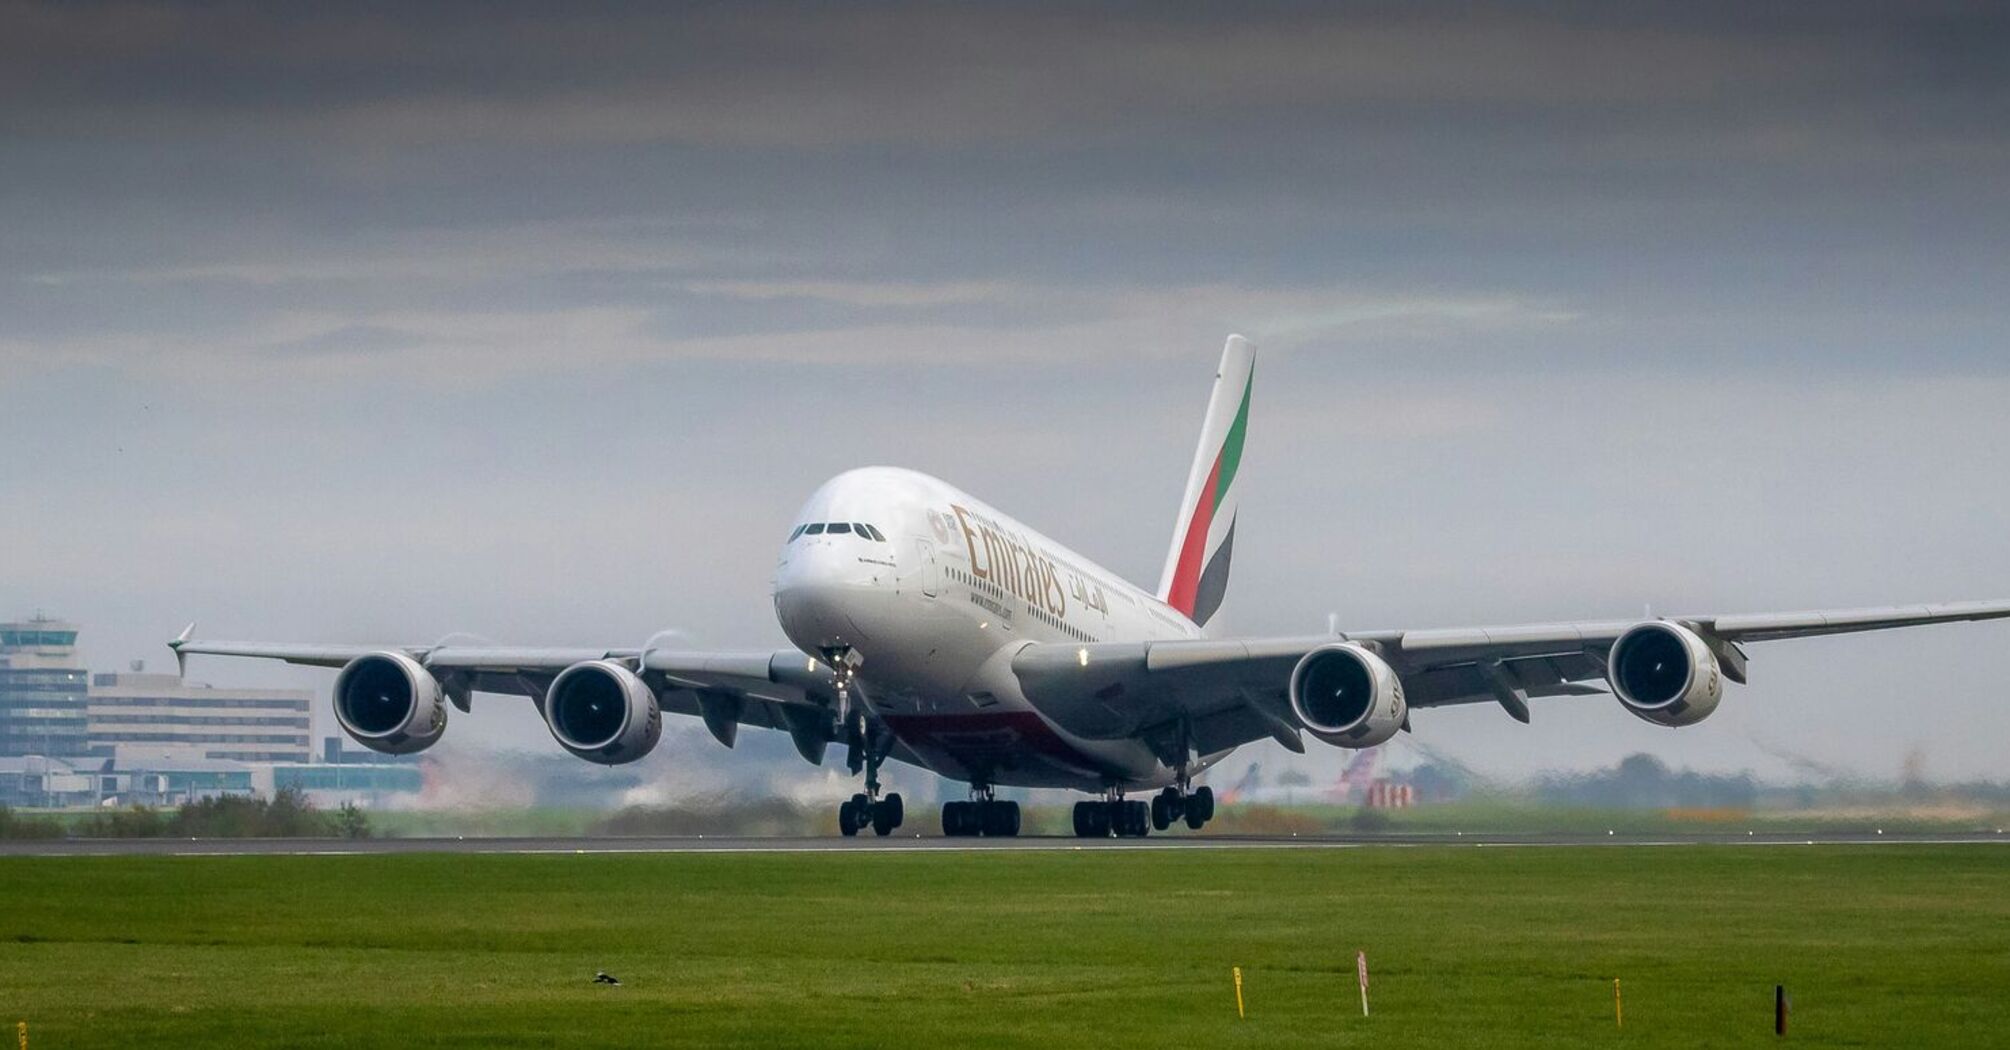 Emirates airjet on the runway